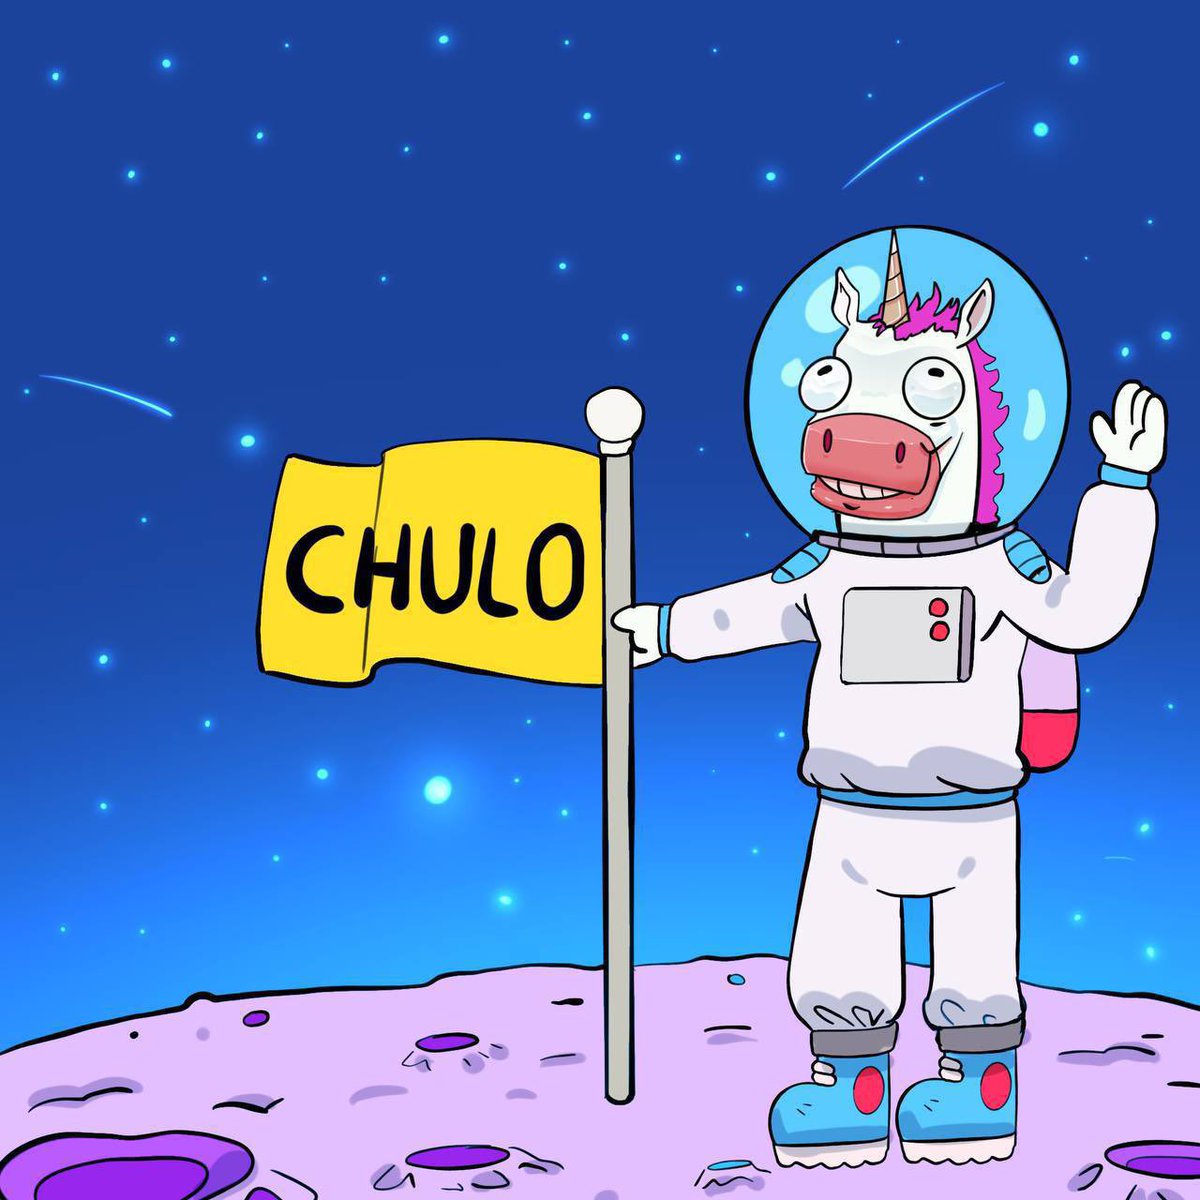 @CryptoTony__ GM $CHULO Legends. The only unicorn on Solana with a great community 🦄🦄🦄🦄🦄🦄🦄🦄🦄🦄🦄.
Join and be part of the $CHULO gang :

t.me/chulocoinonsol